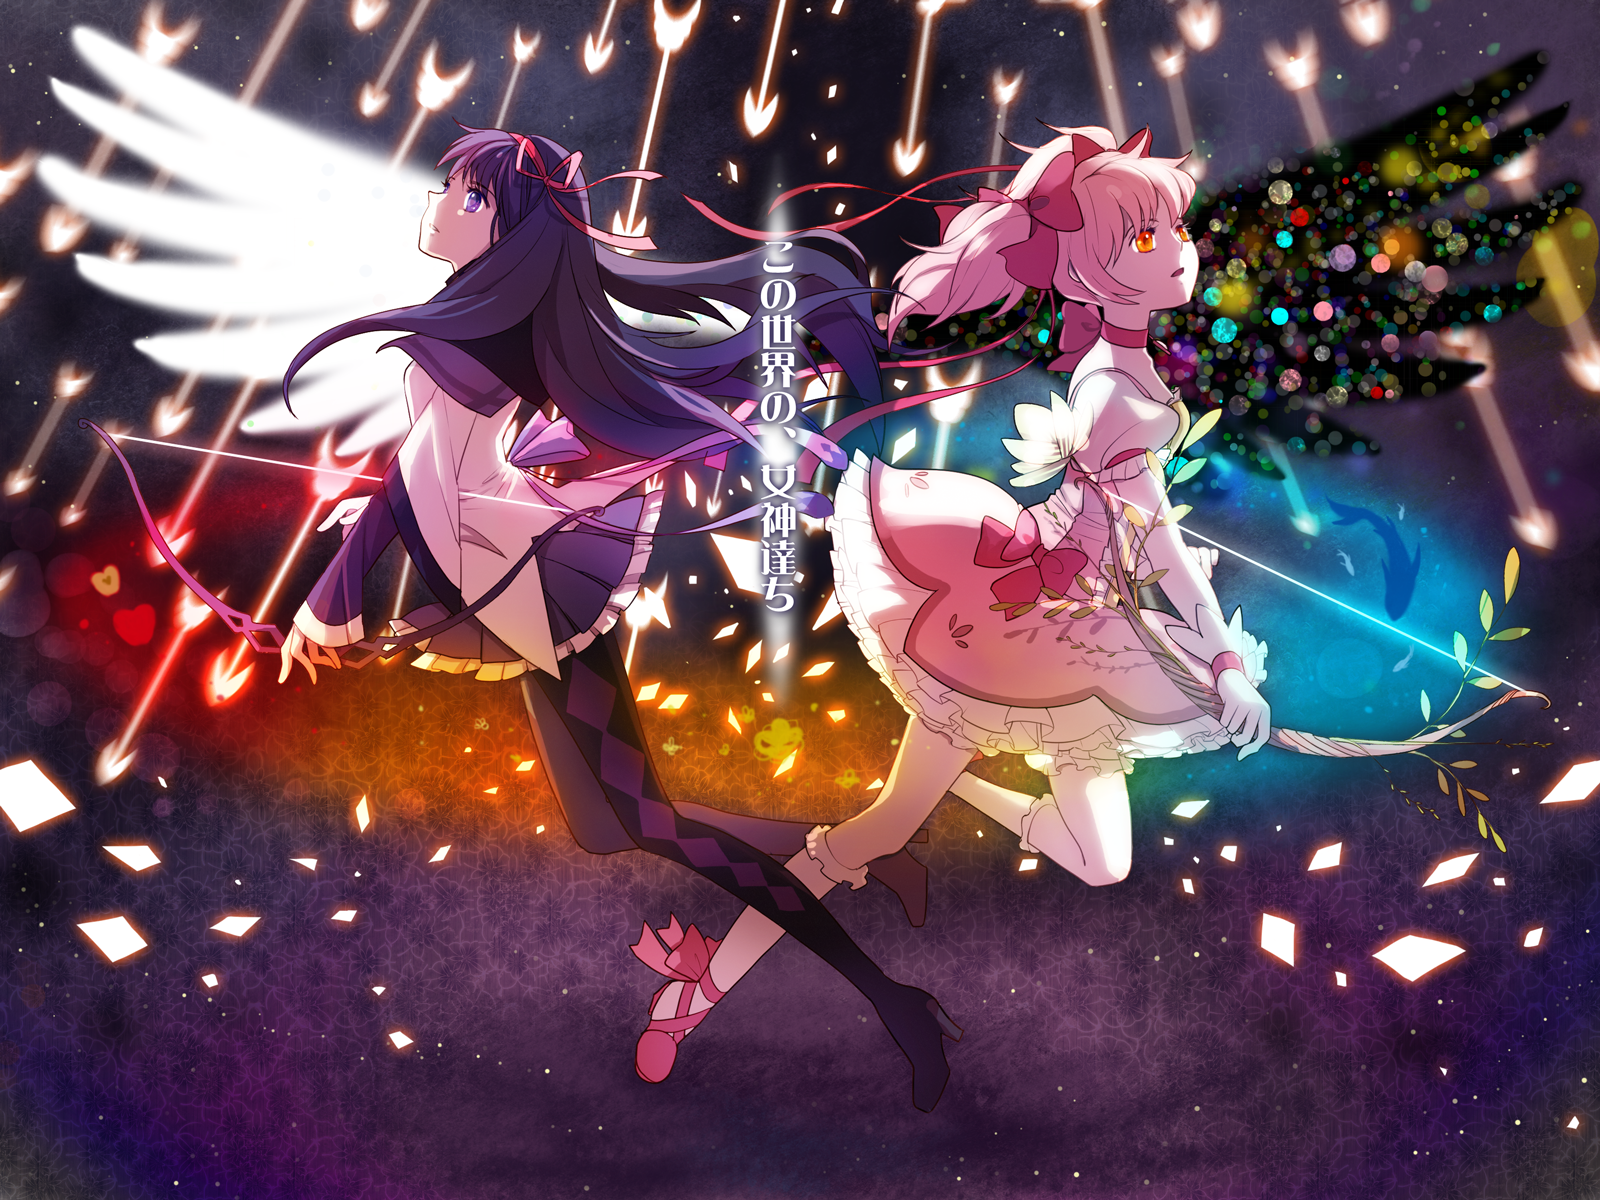 Magical Girls In The Limelight - Madoka Magica